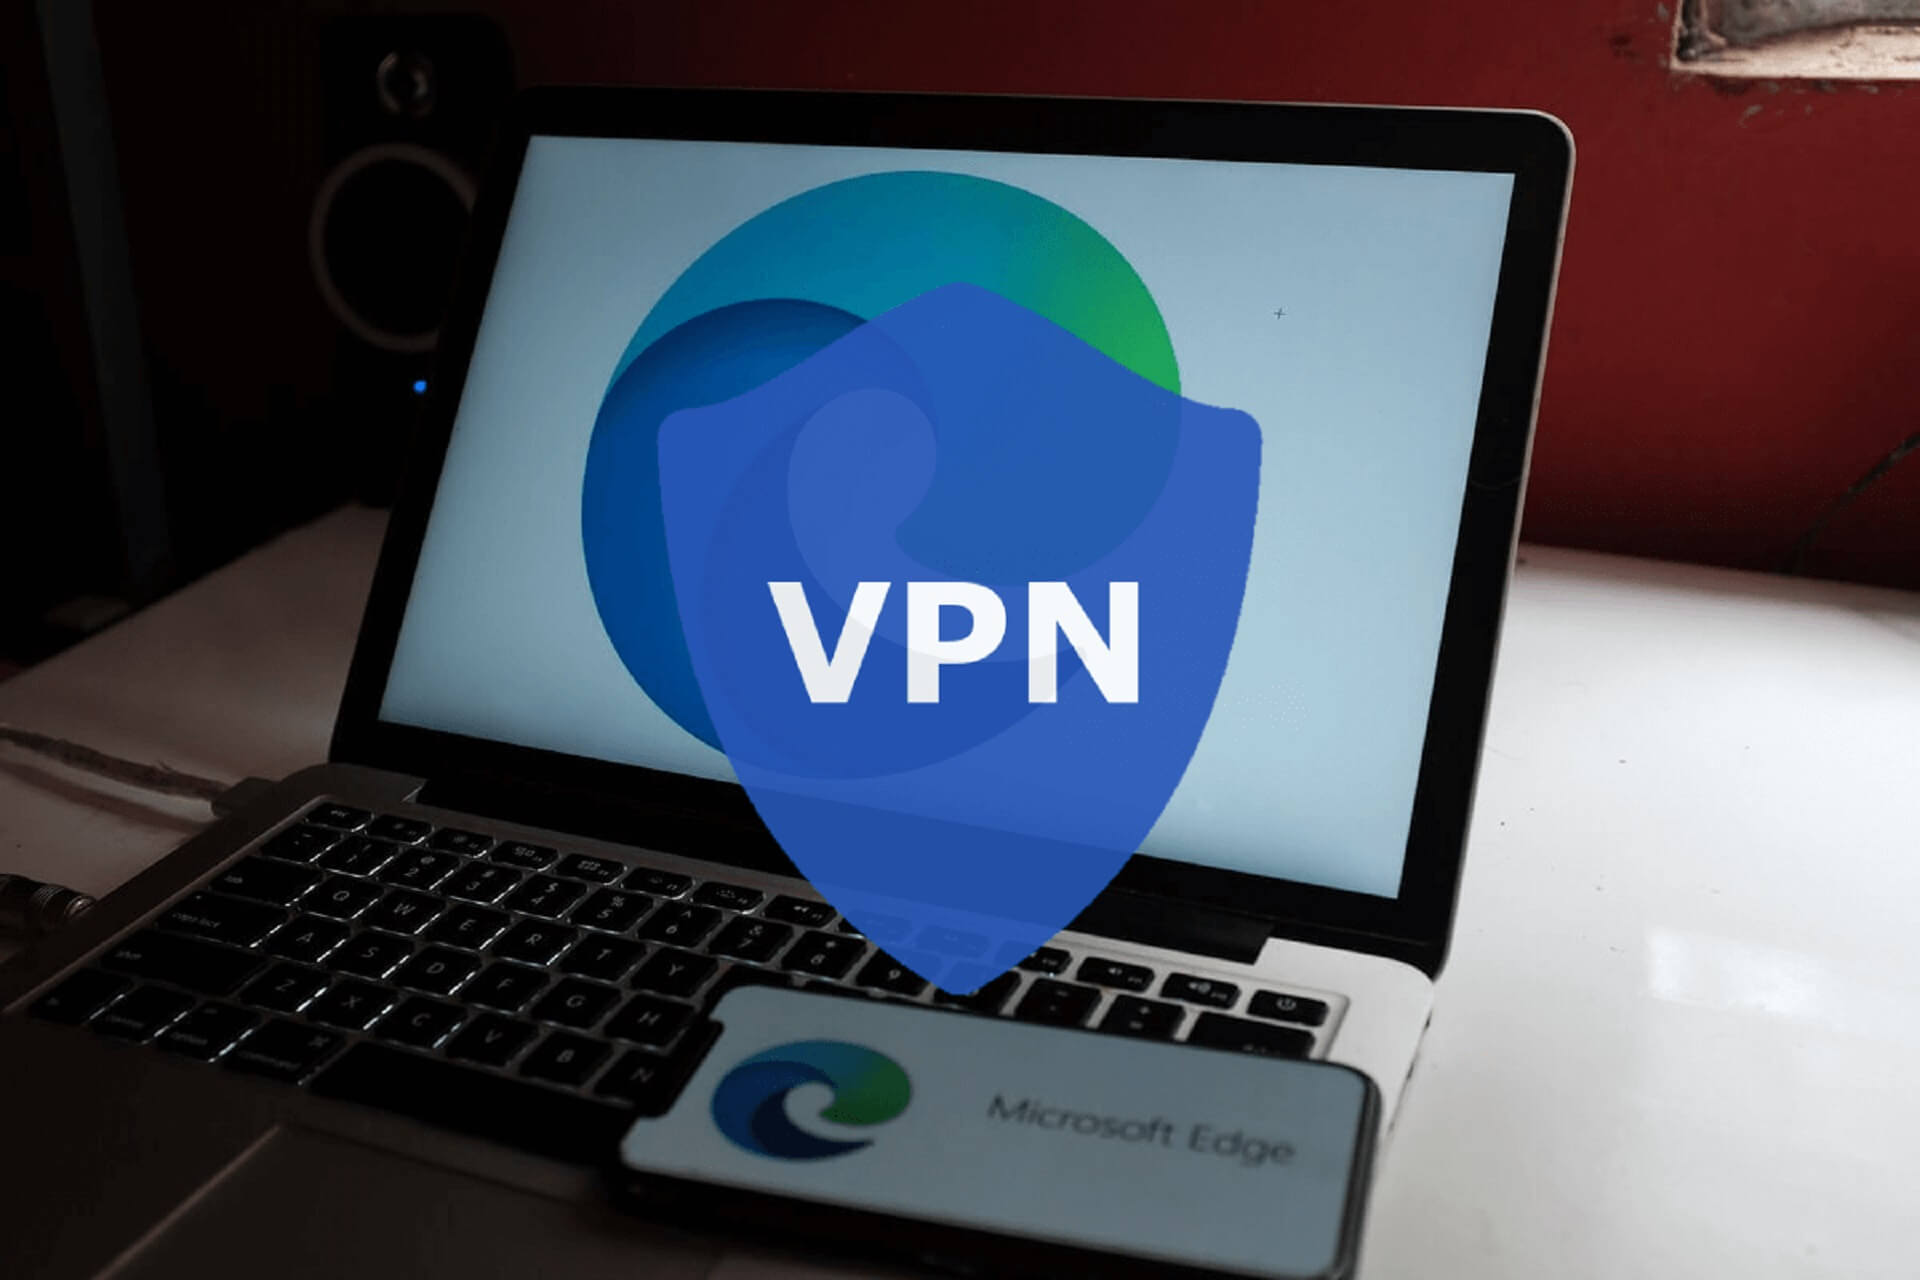 Microsoft Edge not working with VPN